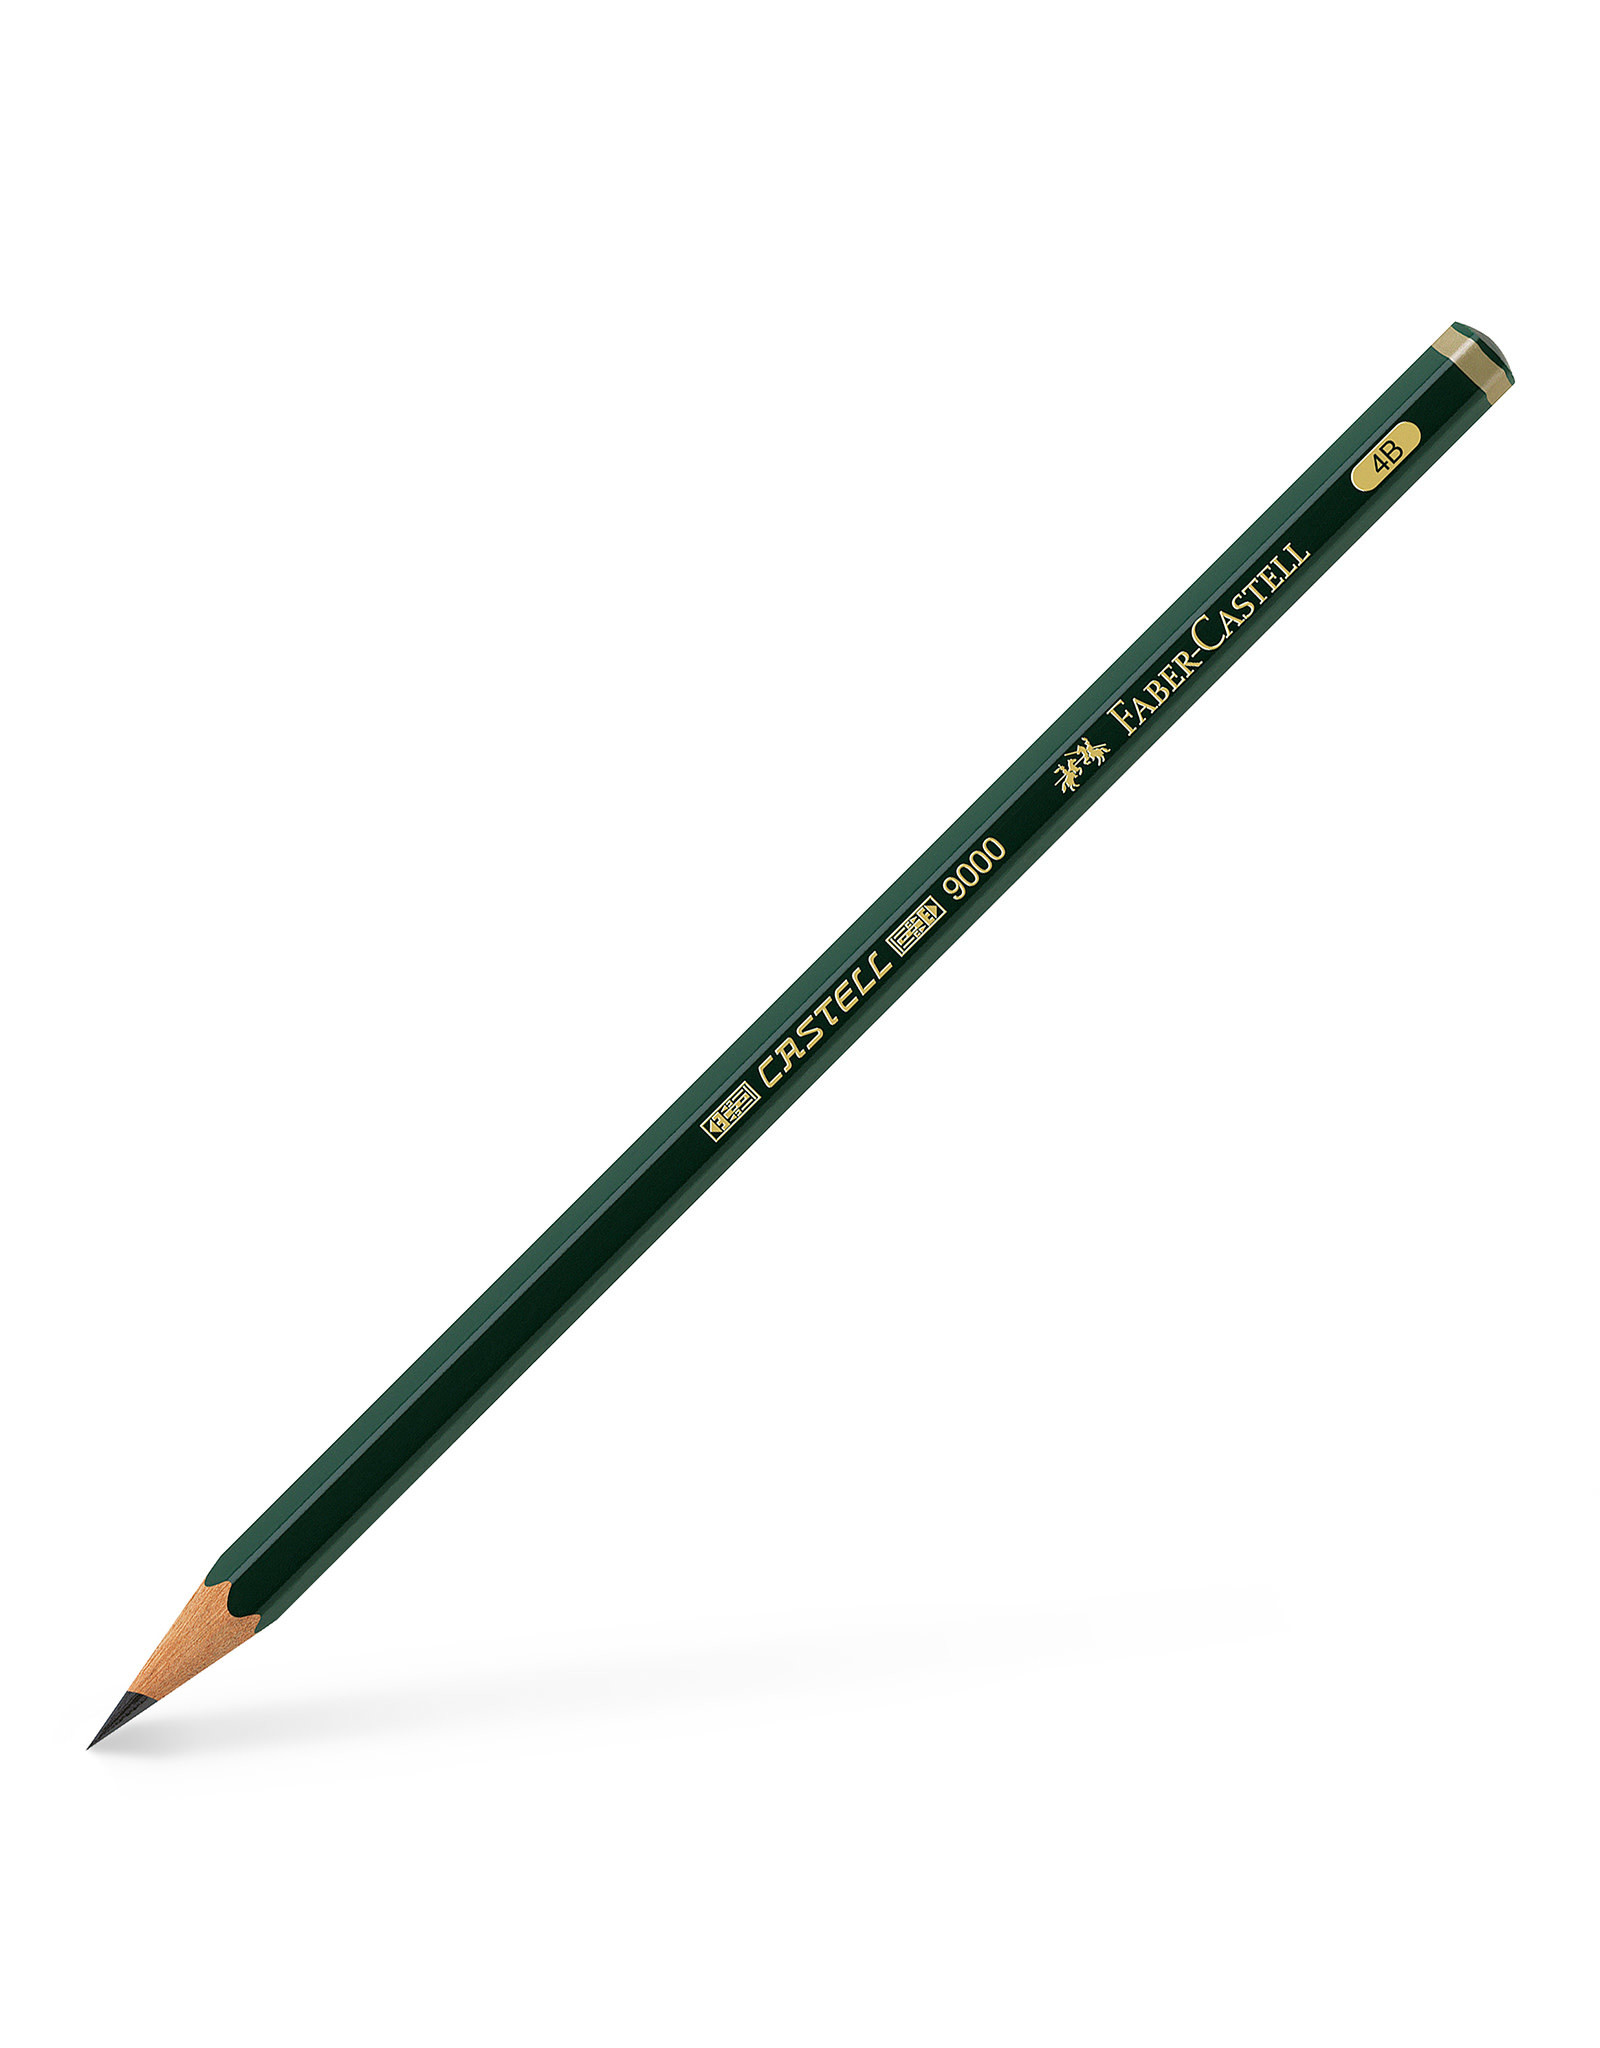 FABER-CASTELL Castell® 9000 Graphite Pencil, 4B